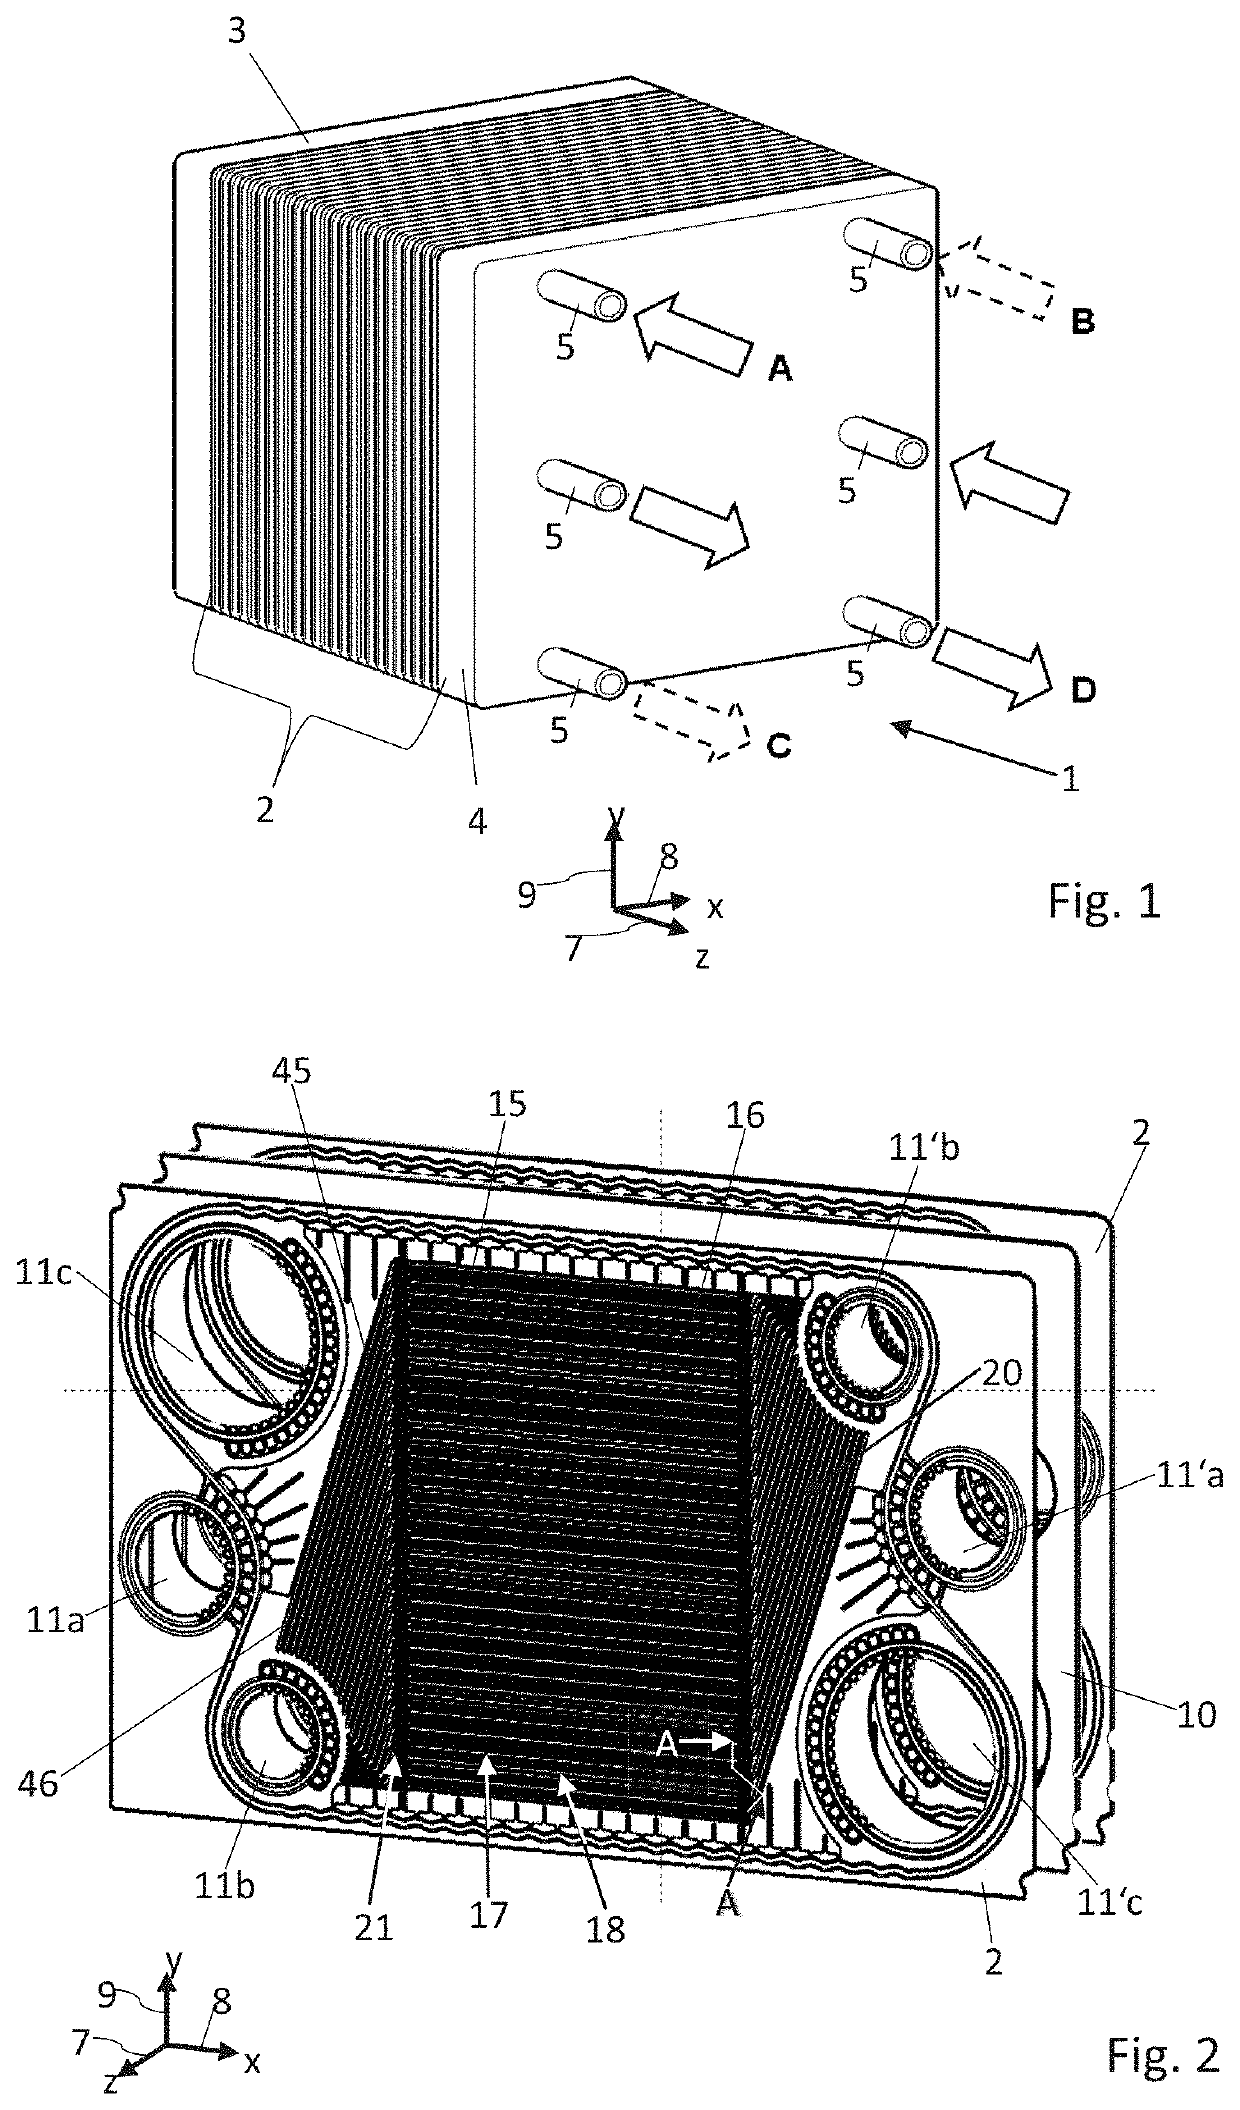 Separator plate with periodic surface structures in the nanometer to micrometer range